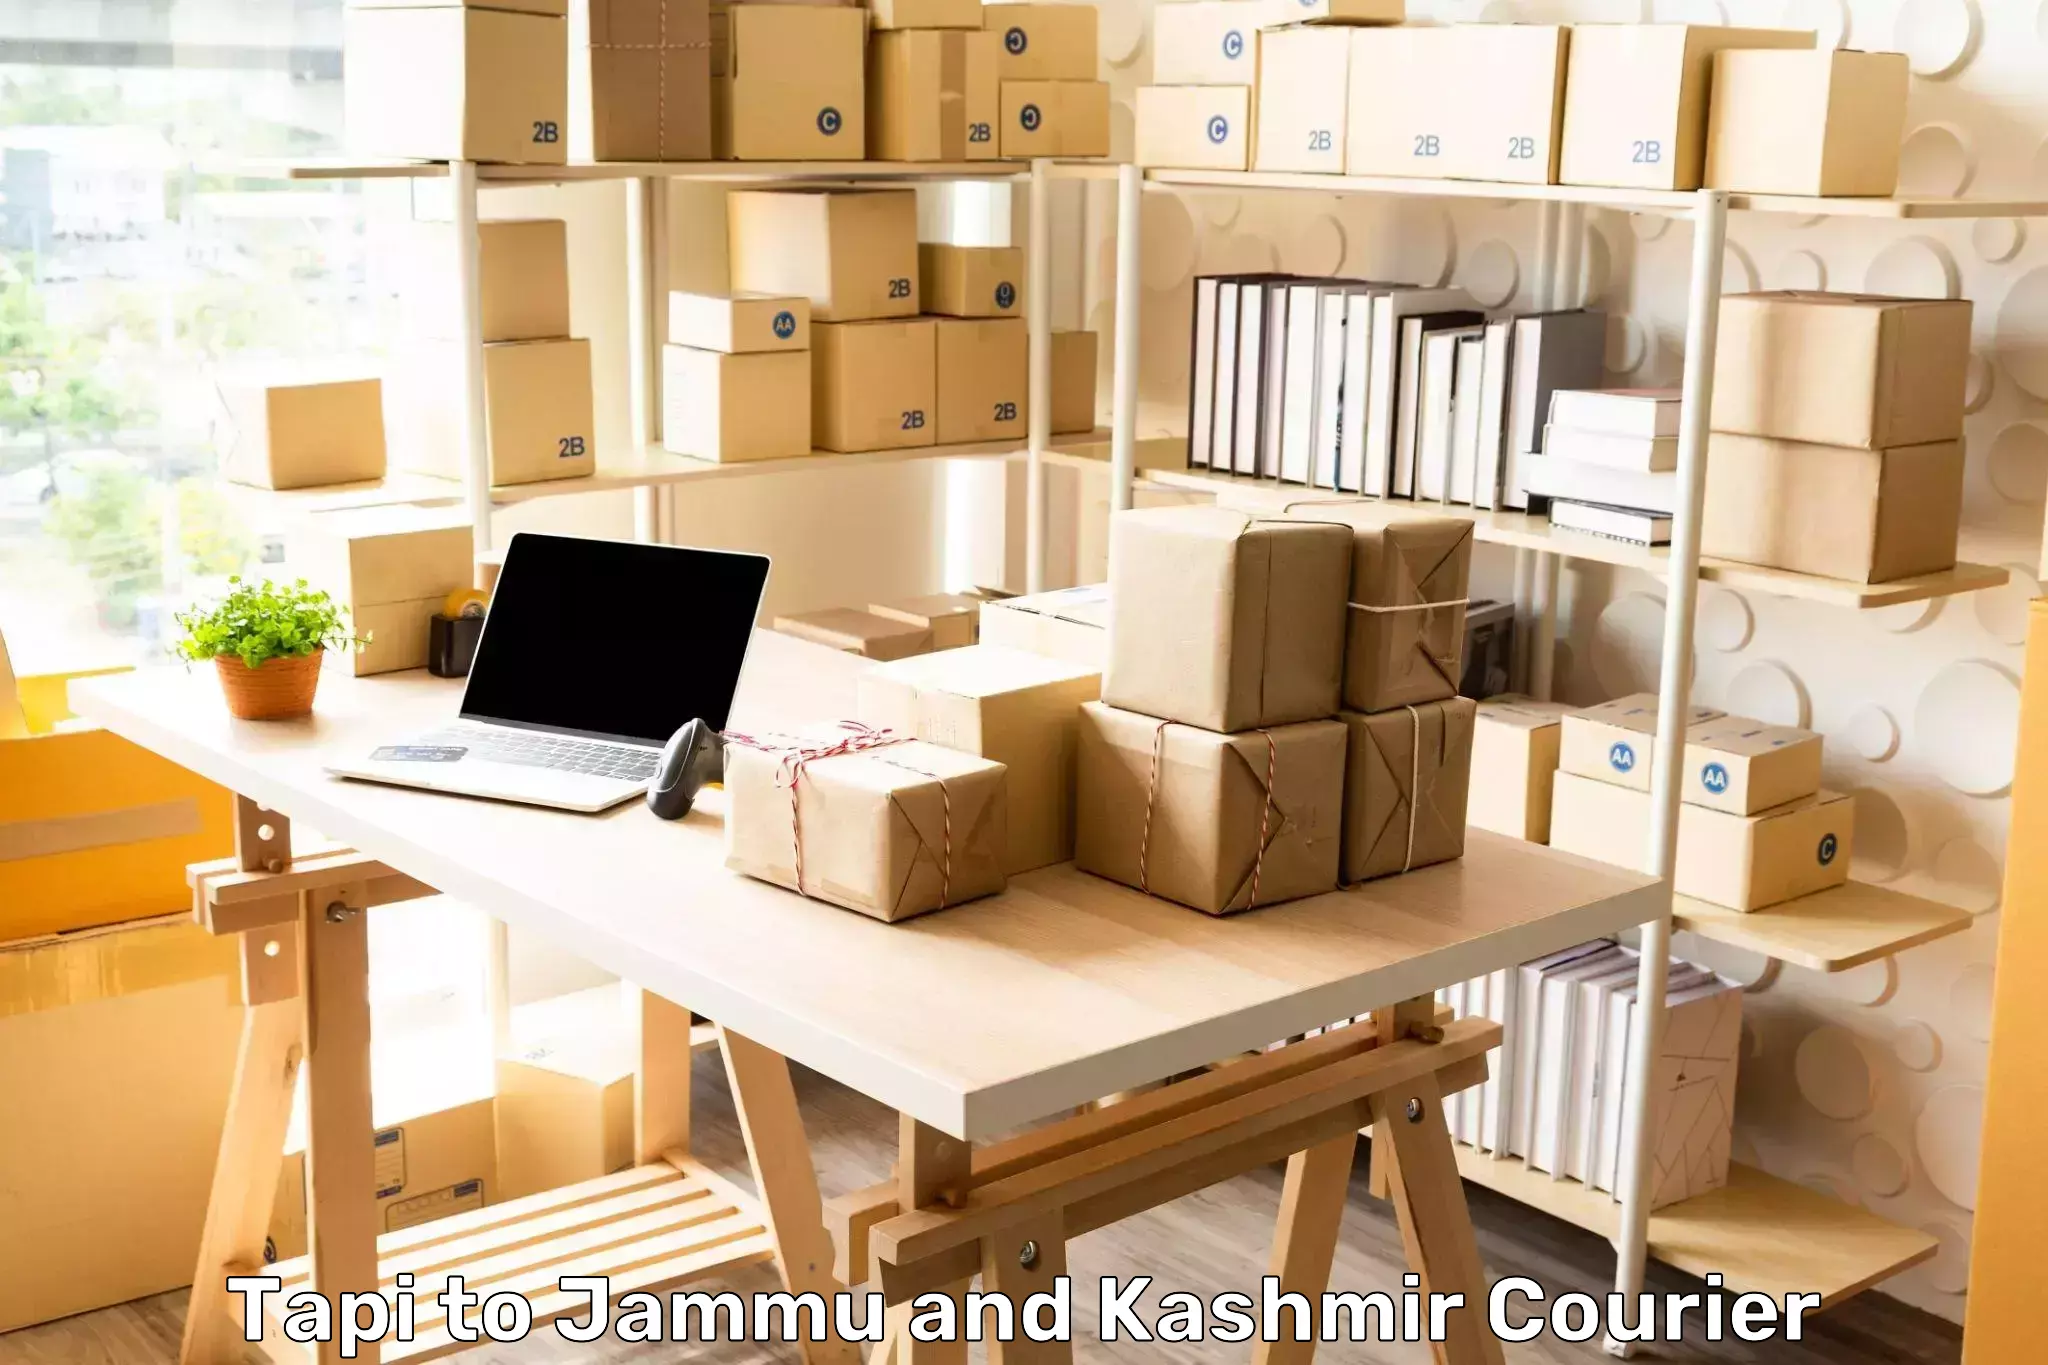 Advanced freight services Tapi to Jammu and Kashmir